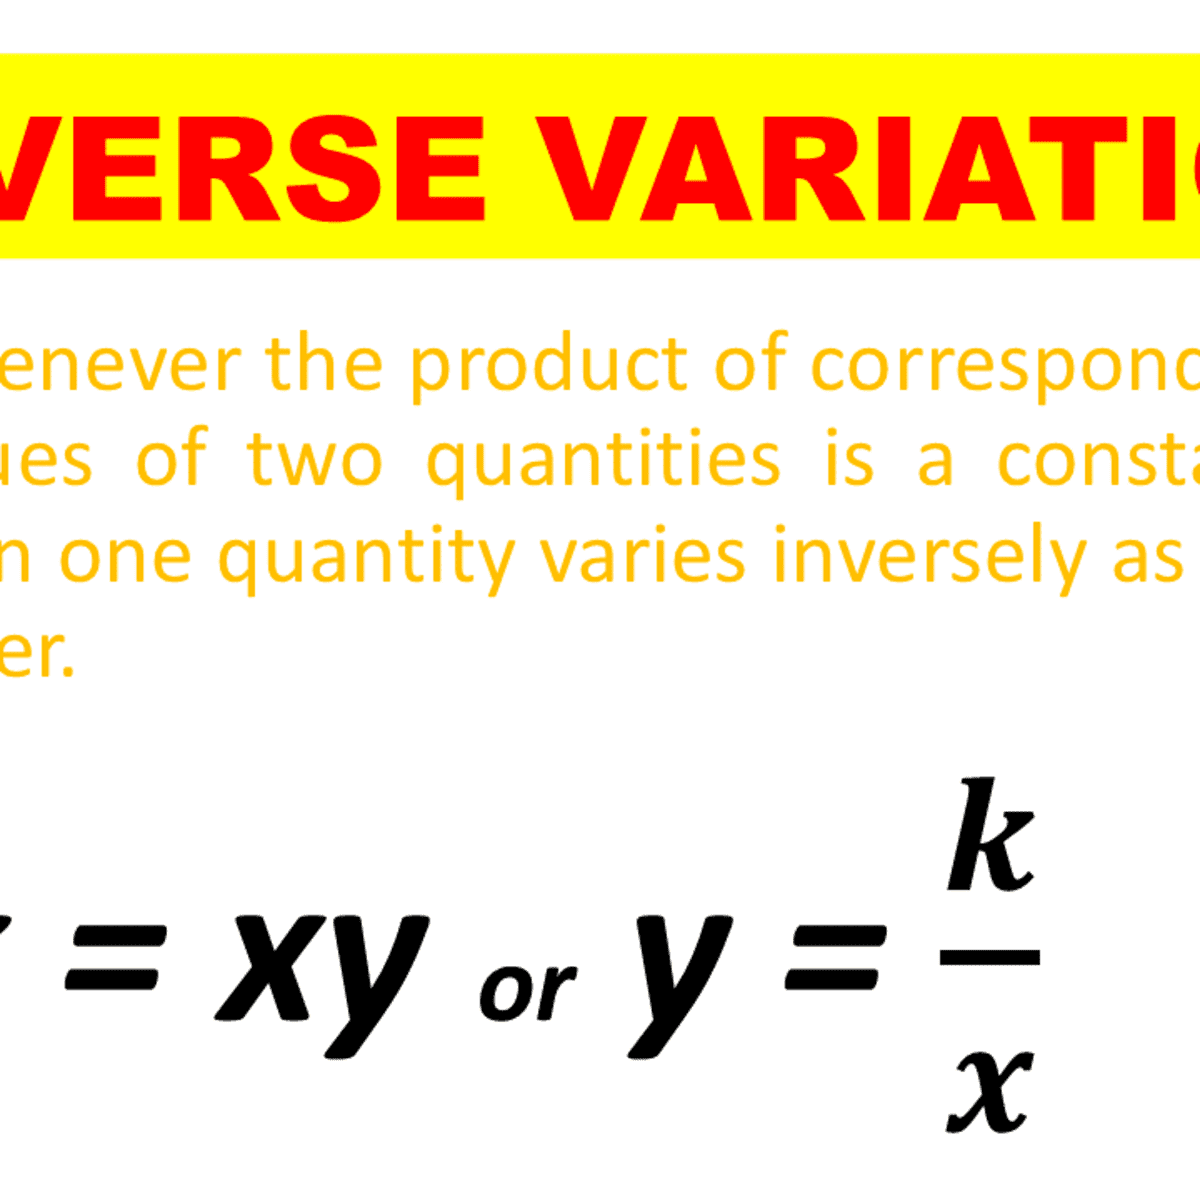 inverse variation real life examples